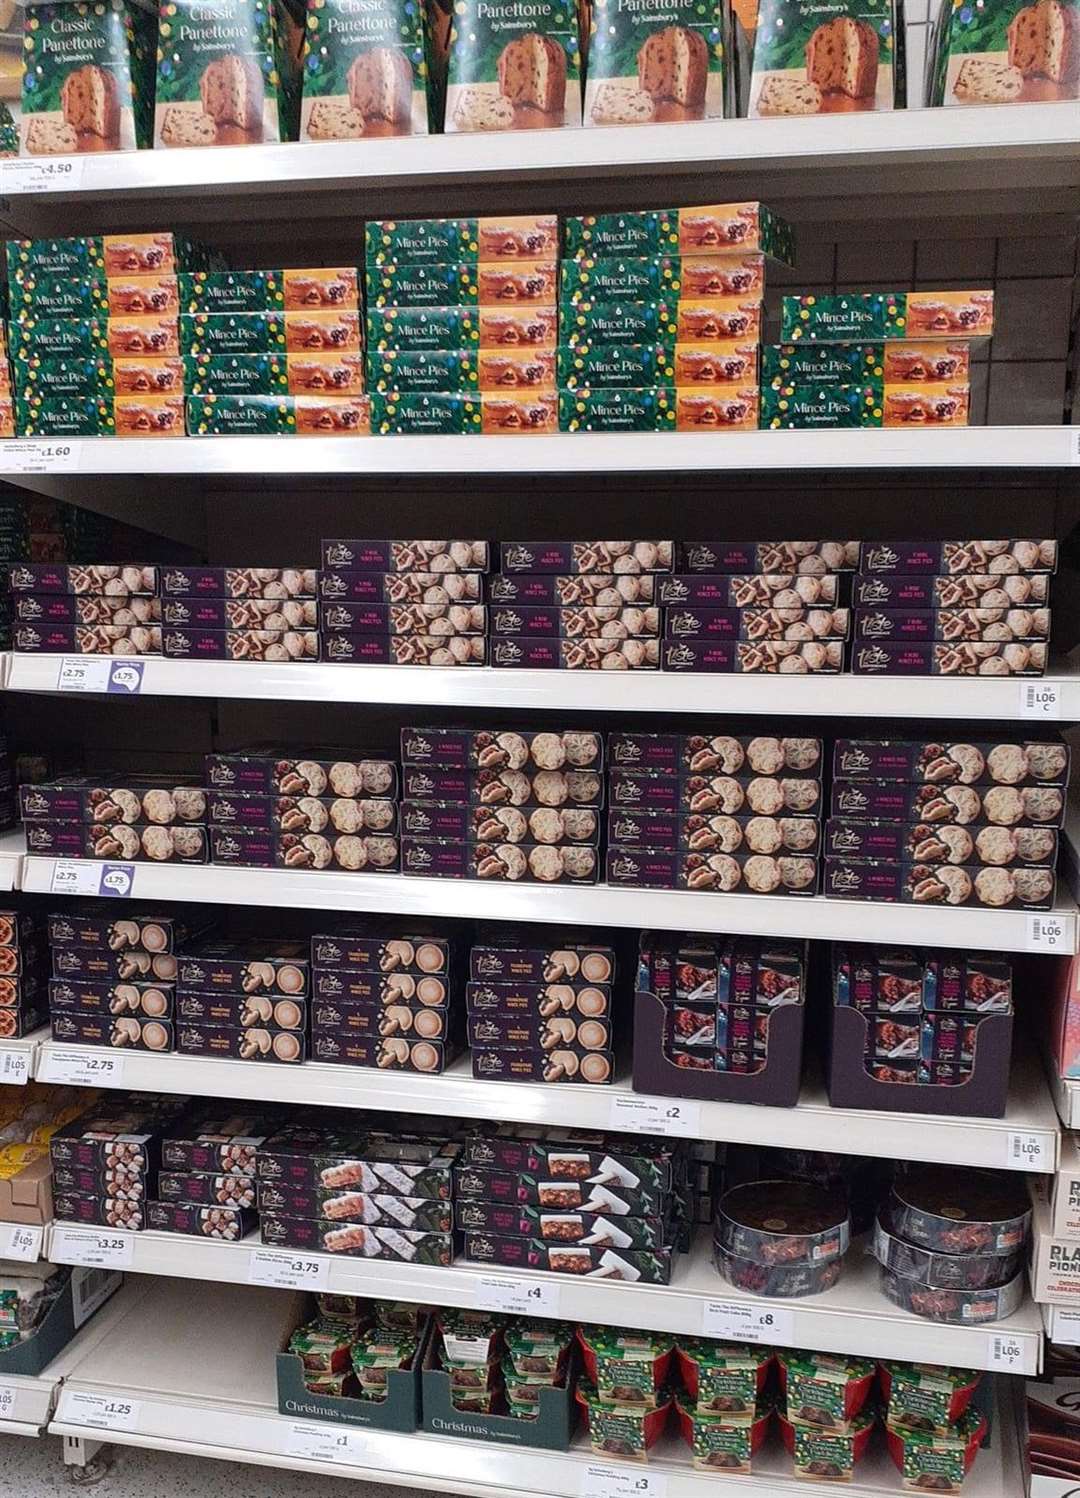 A variety of Christmas produce was seen stacked on shelves at Sainsbury's